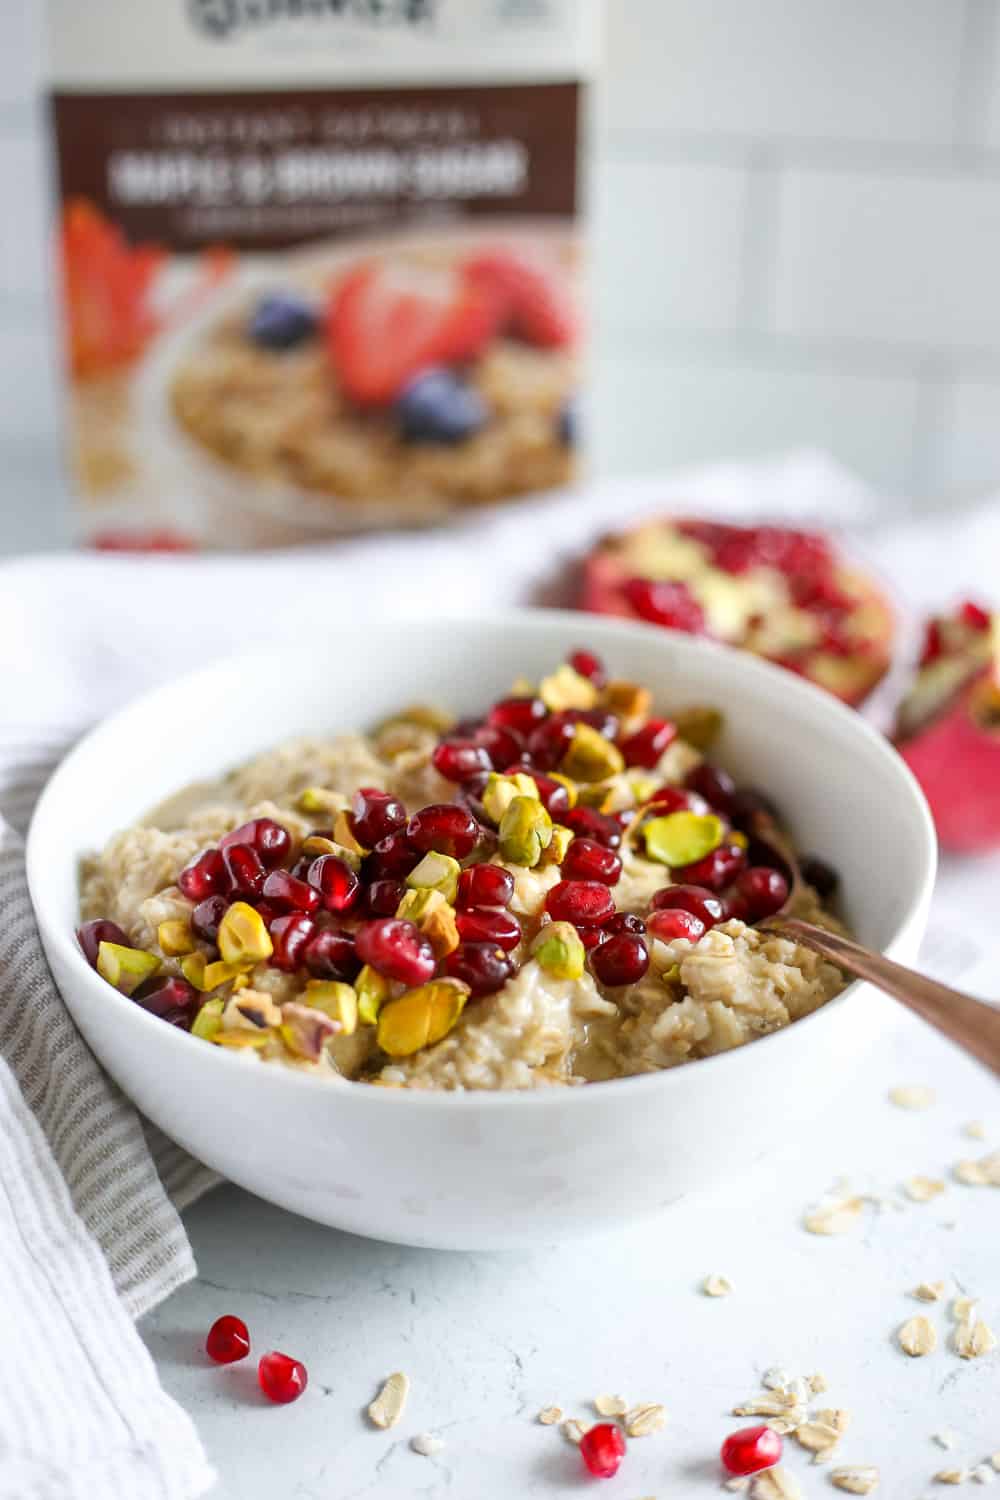 A view of a white bowl on a kitchen countertop, filled with a colorful hot oatmeal mixture topped with pomegranate, pistachios, and tahini with a box of Quaker oatmeal in the background